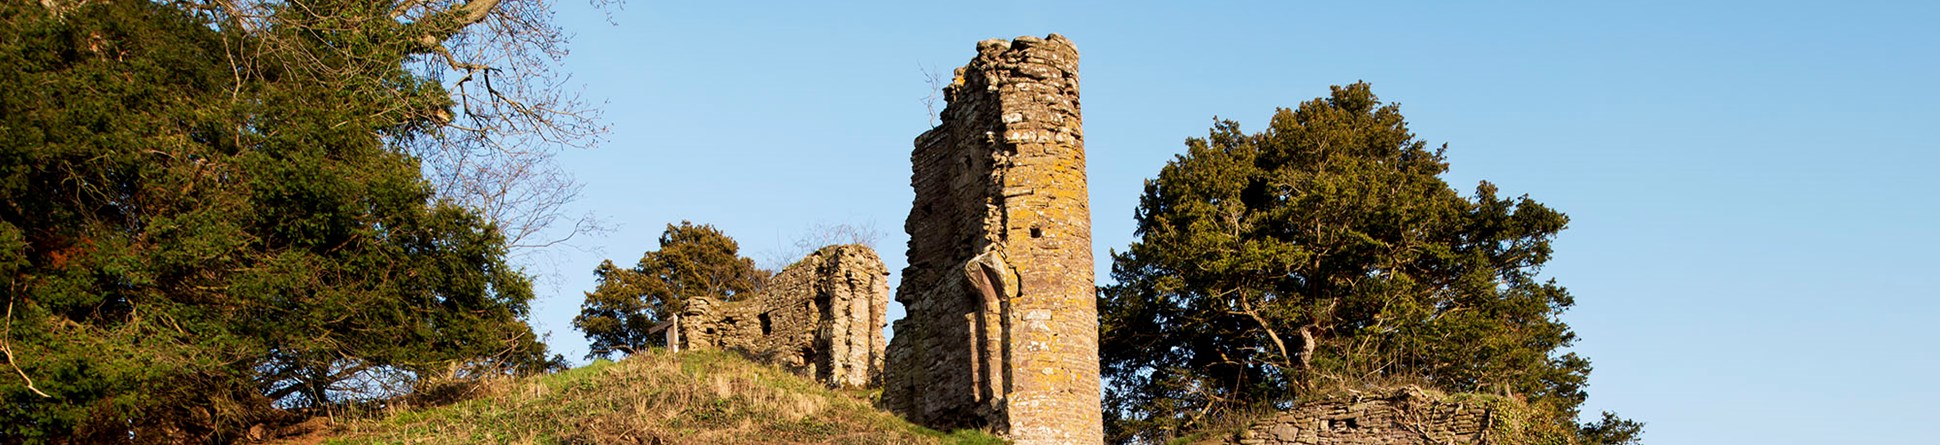 Snodhill Castle - general view of motte and keep from the north west